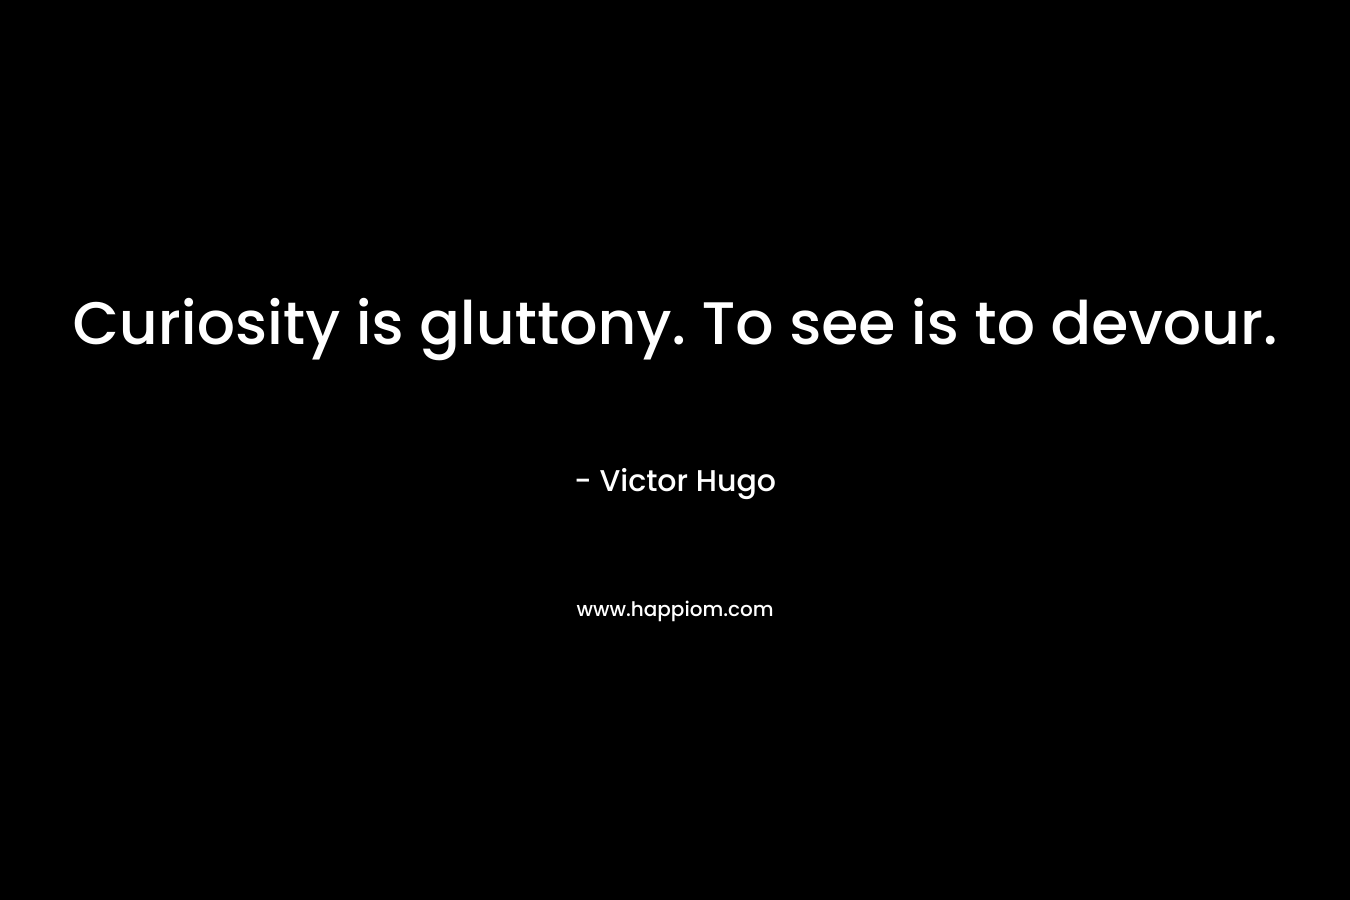 Curiosity is gluttony. To see is to devour.